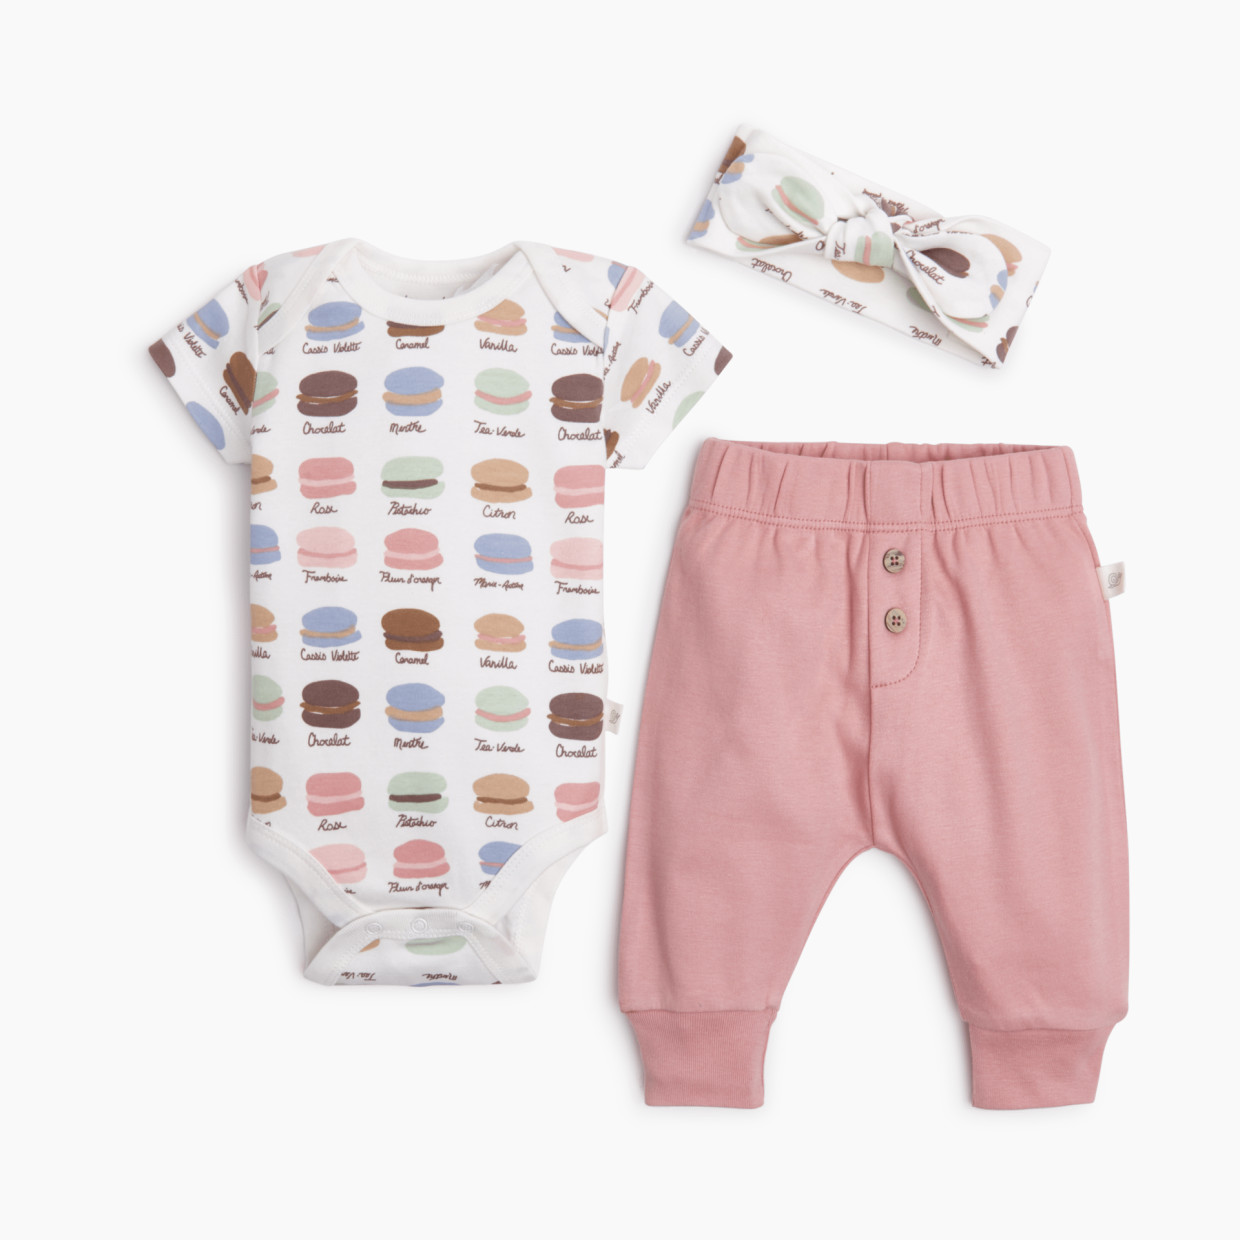 Tiny Kind The Outfit 3 Piece Set - Macaroons, 9-12 M.